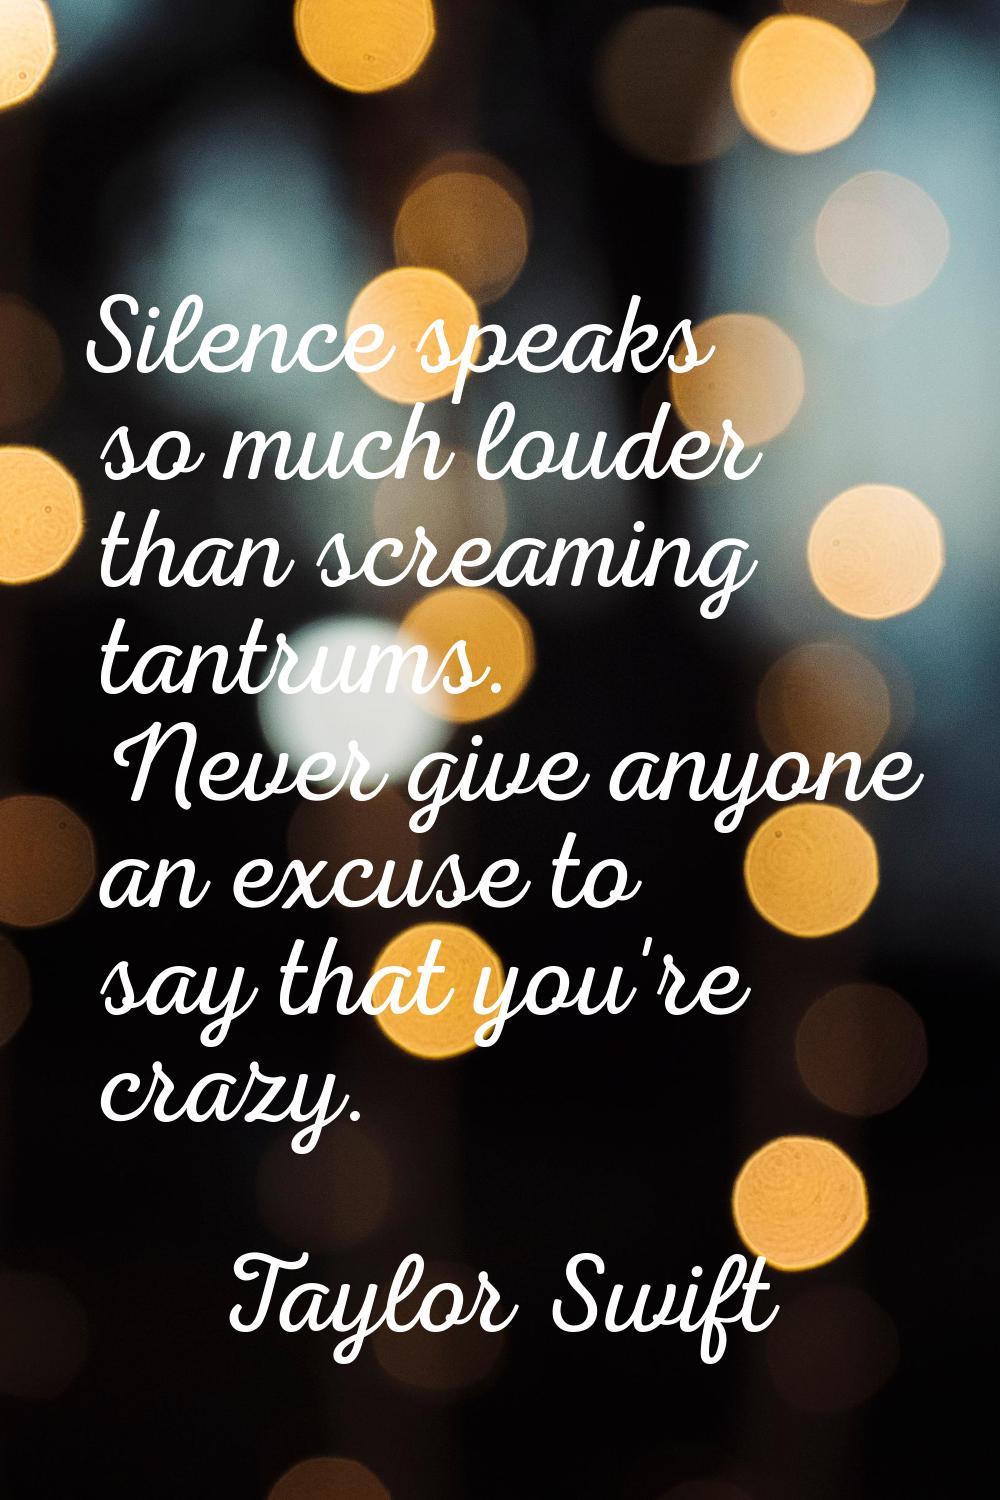 Silence speaks so much louder than screaming tantrums. Never give anyone an excuse to say that you'